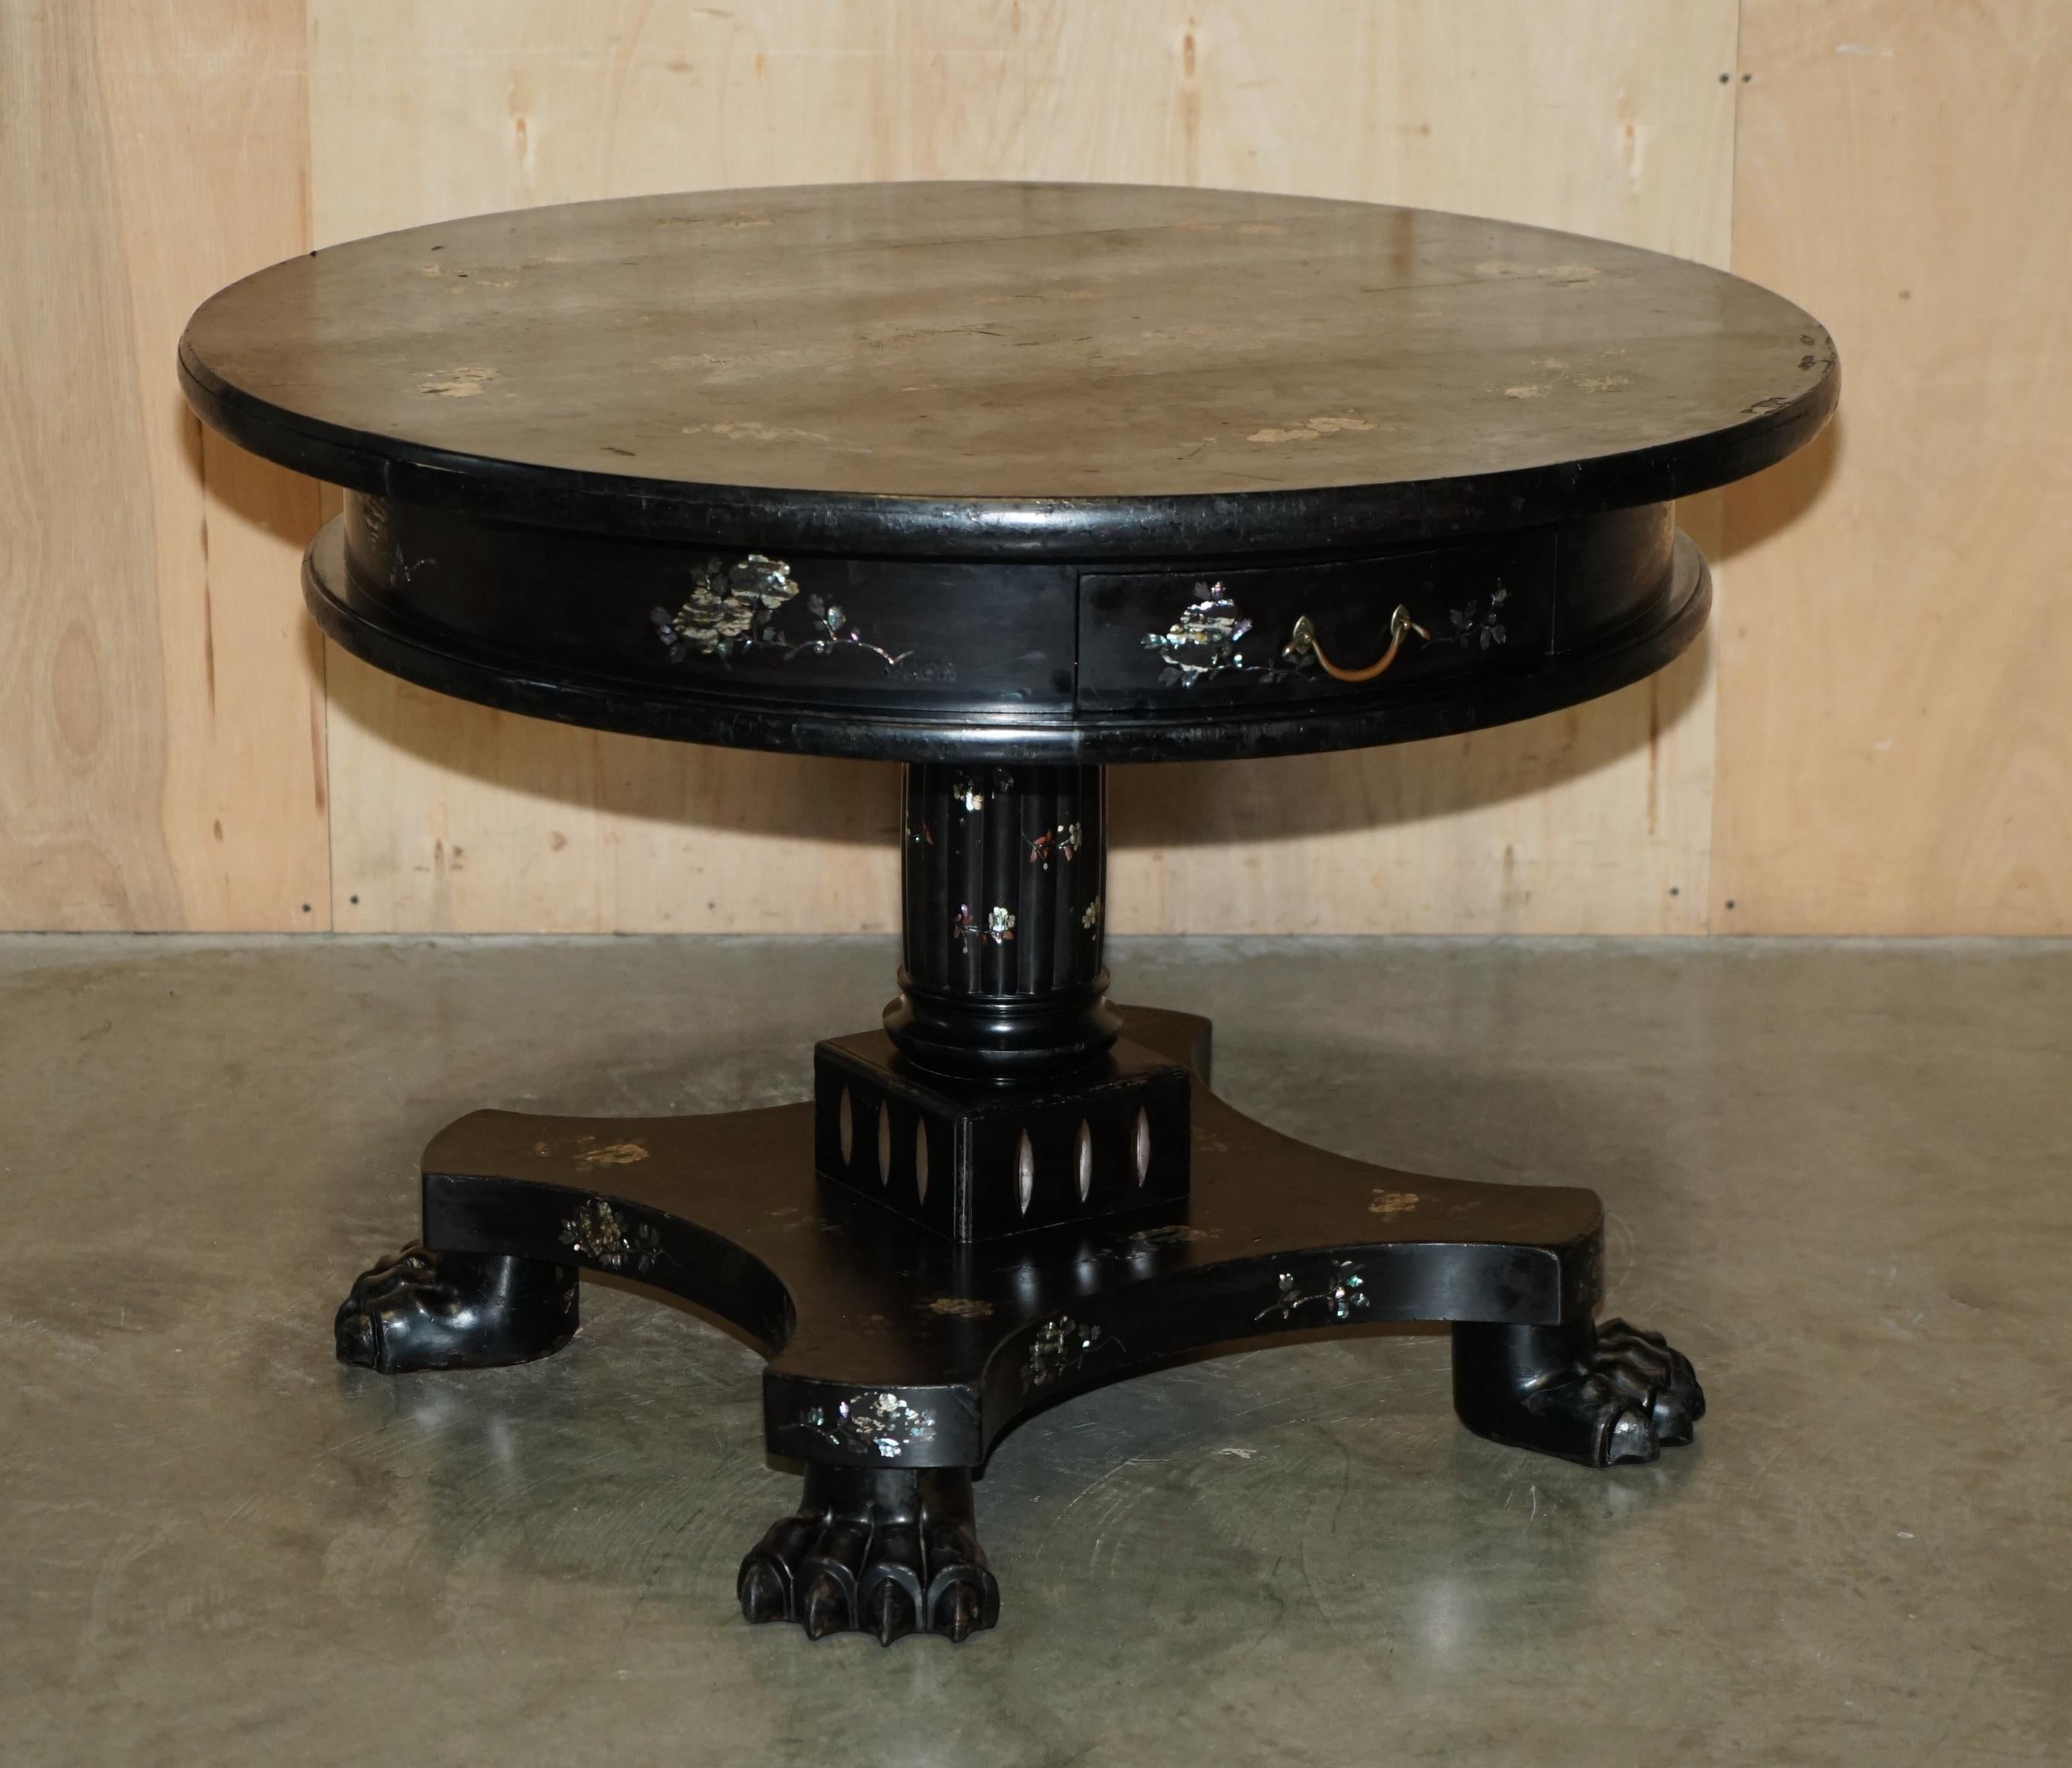 Royal House Antiques

Royal House Antiques is delighted to offer for sale this lovely circa 1820-1840 hand made Chinese Chinoiserie centre occasional or dining table with Mother of Pearl inlay 

Please note the delivery fee listed is just a guide,